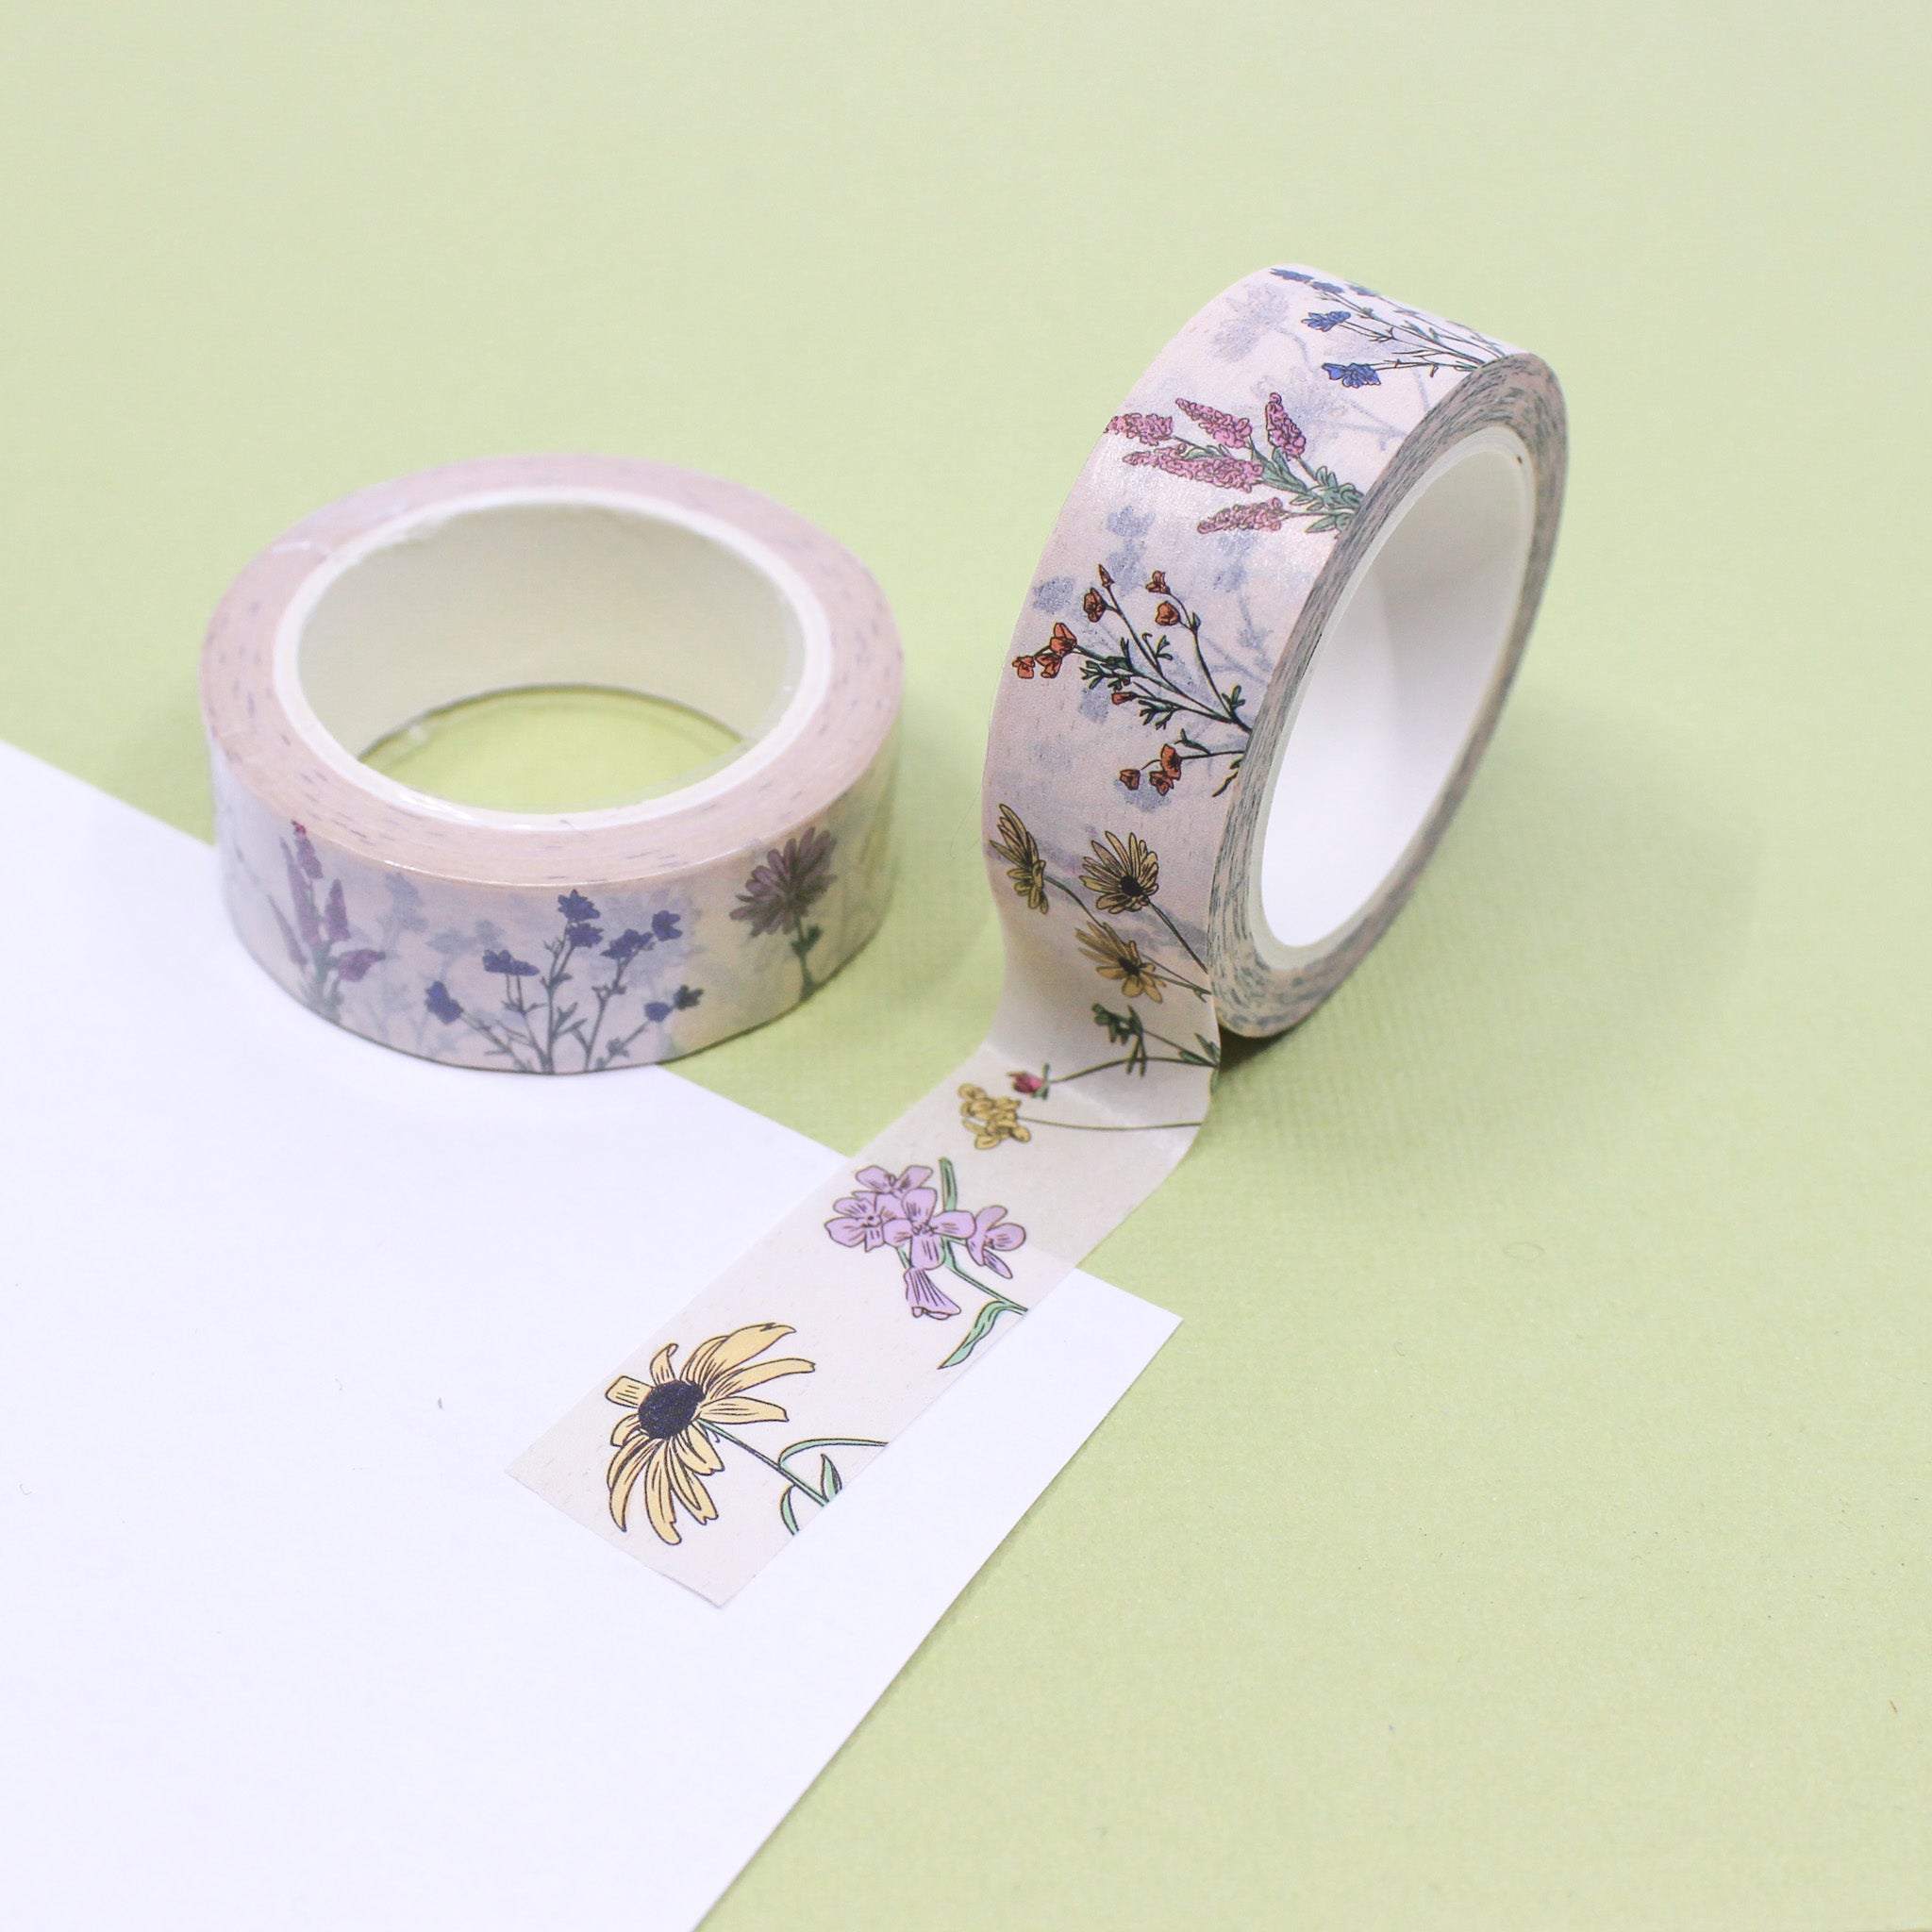 This is a vintage botanical florals pattern washi tape from BBB Supplies Craft Shop